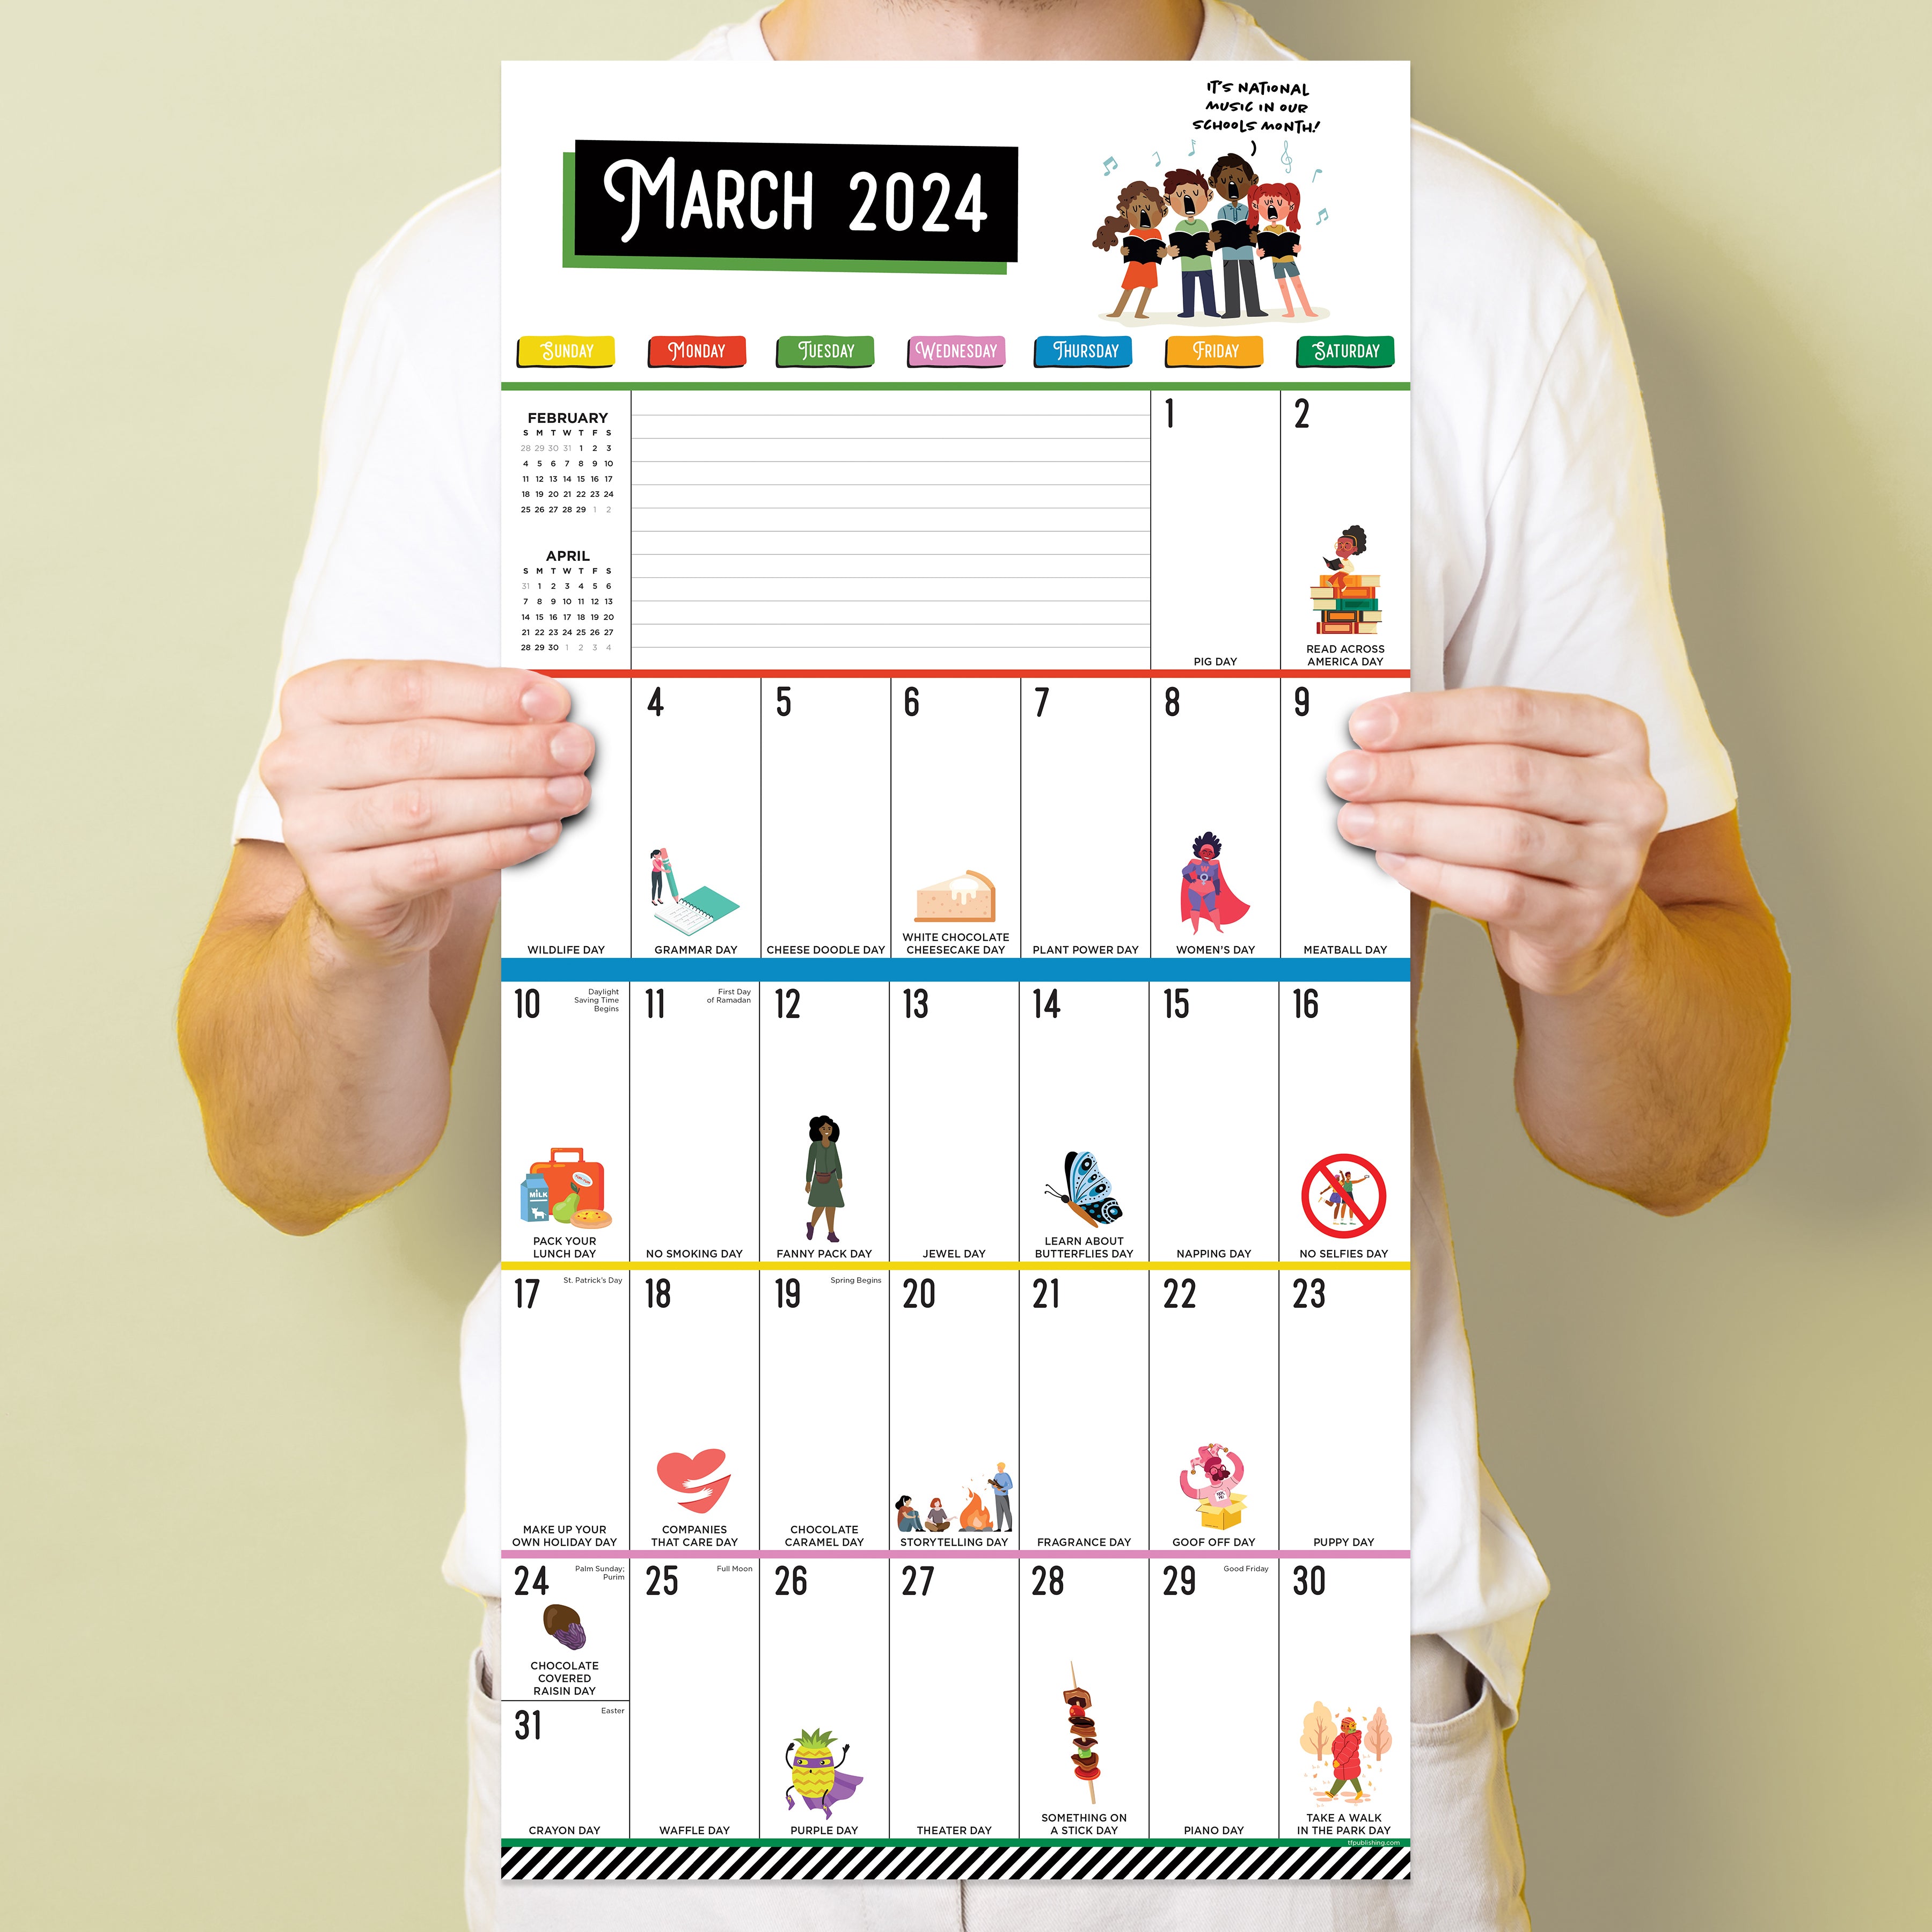 2024 Every Day's A Holiday - Square Wall Calendar